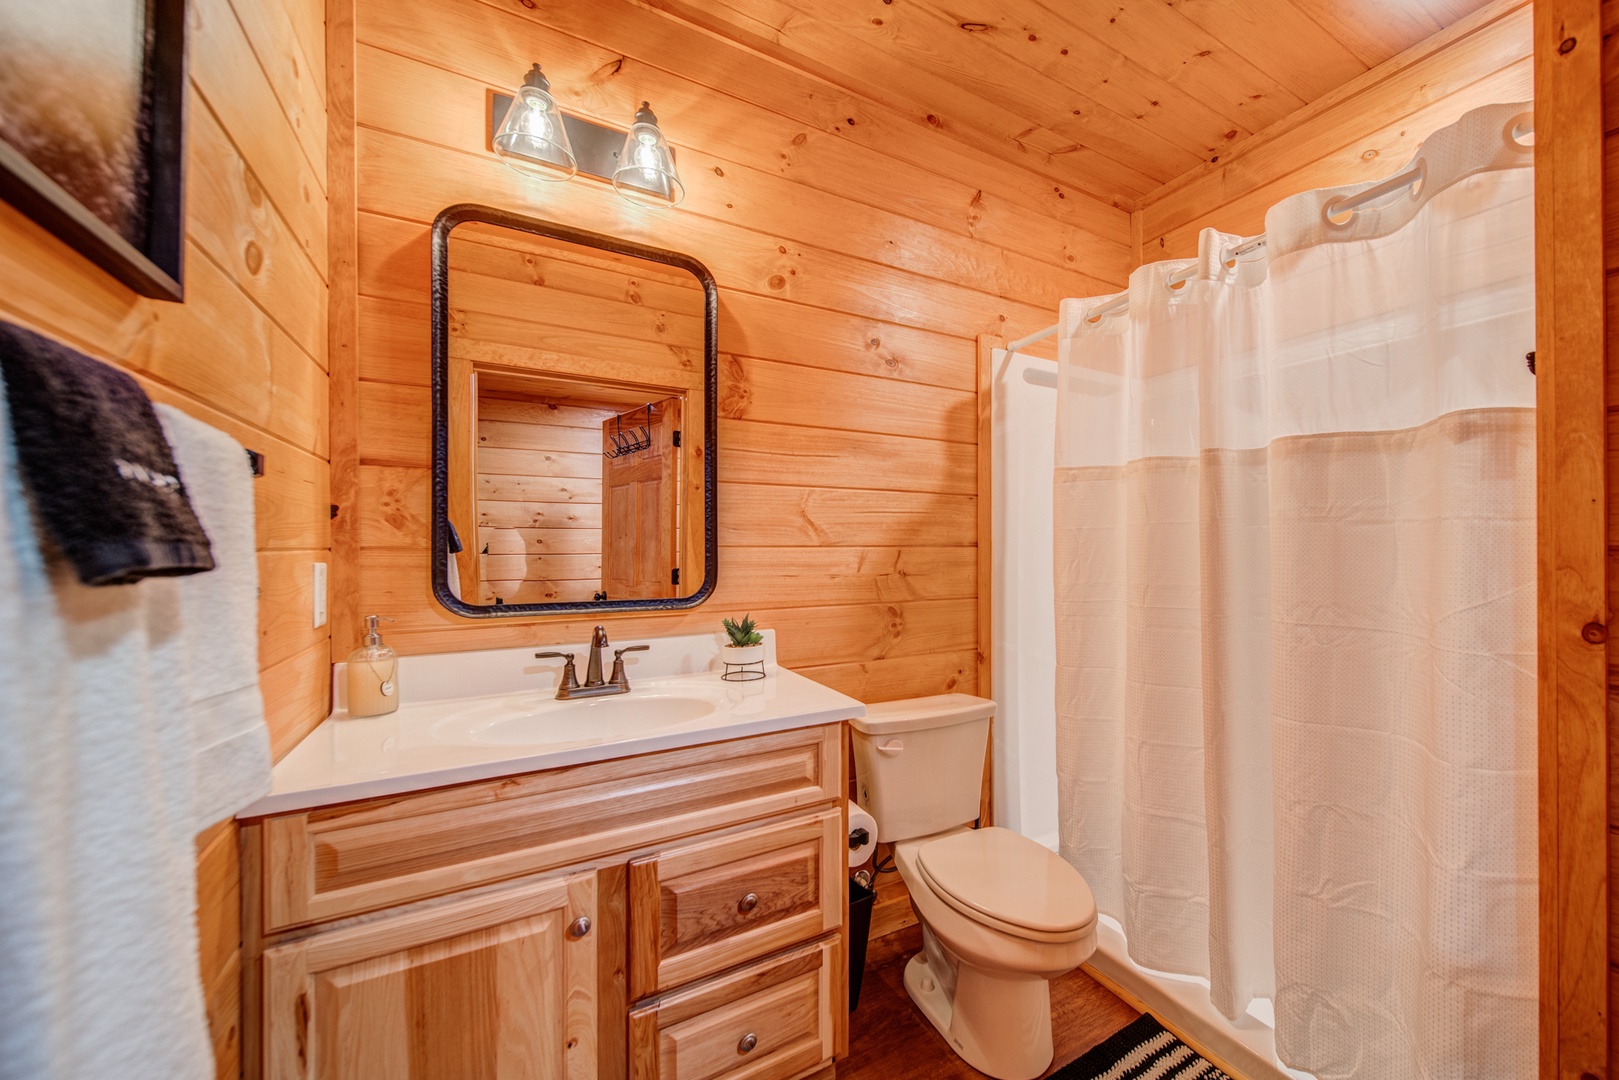 The lower-level full bathroom includes a single vanity & walk-in shower